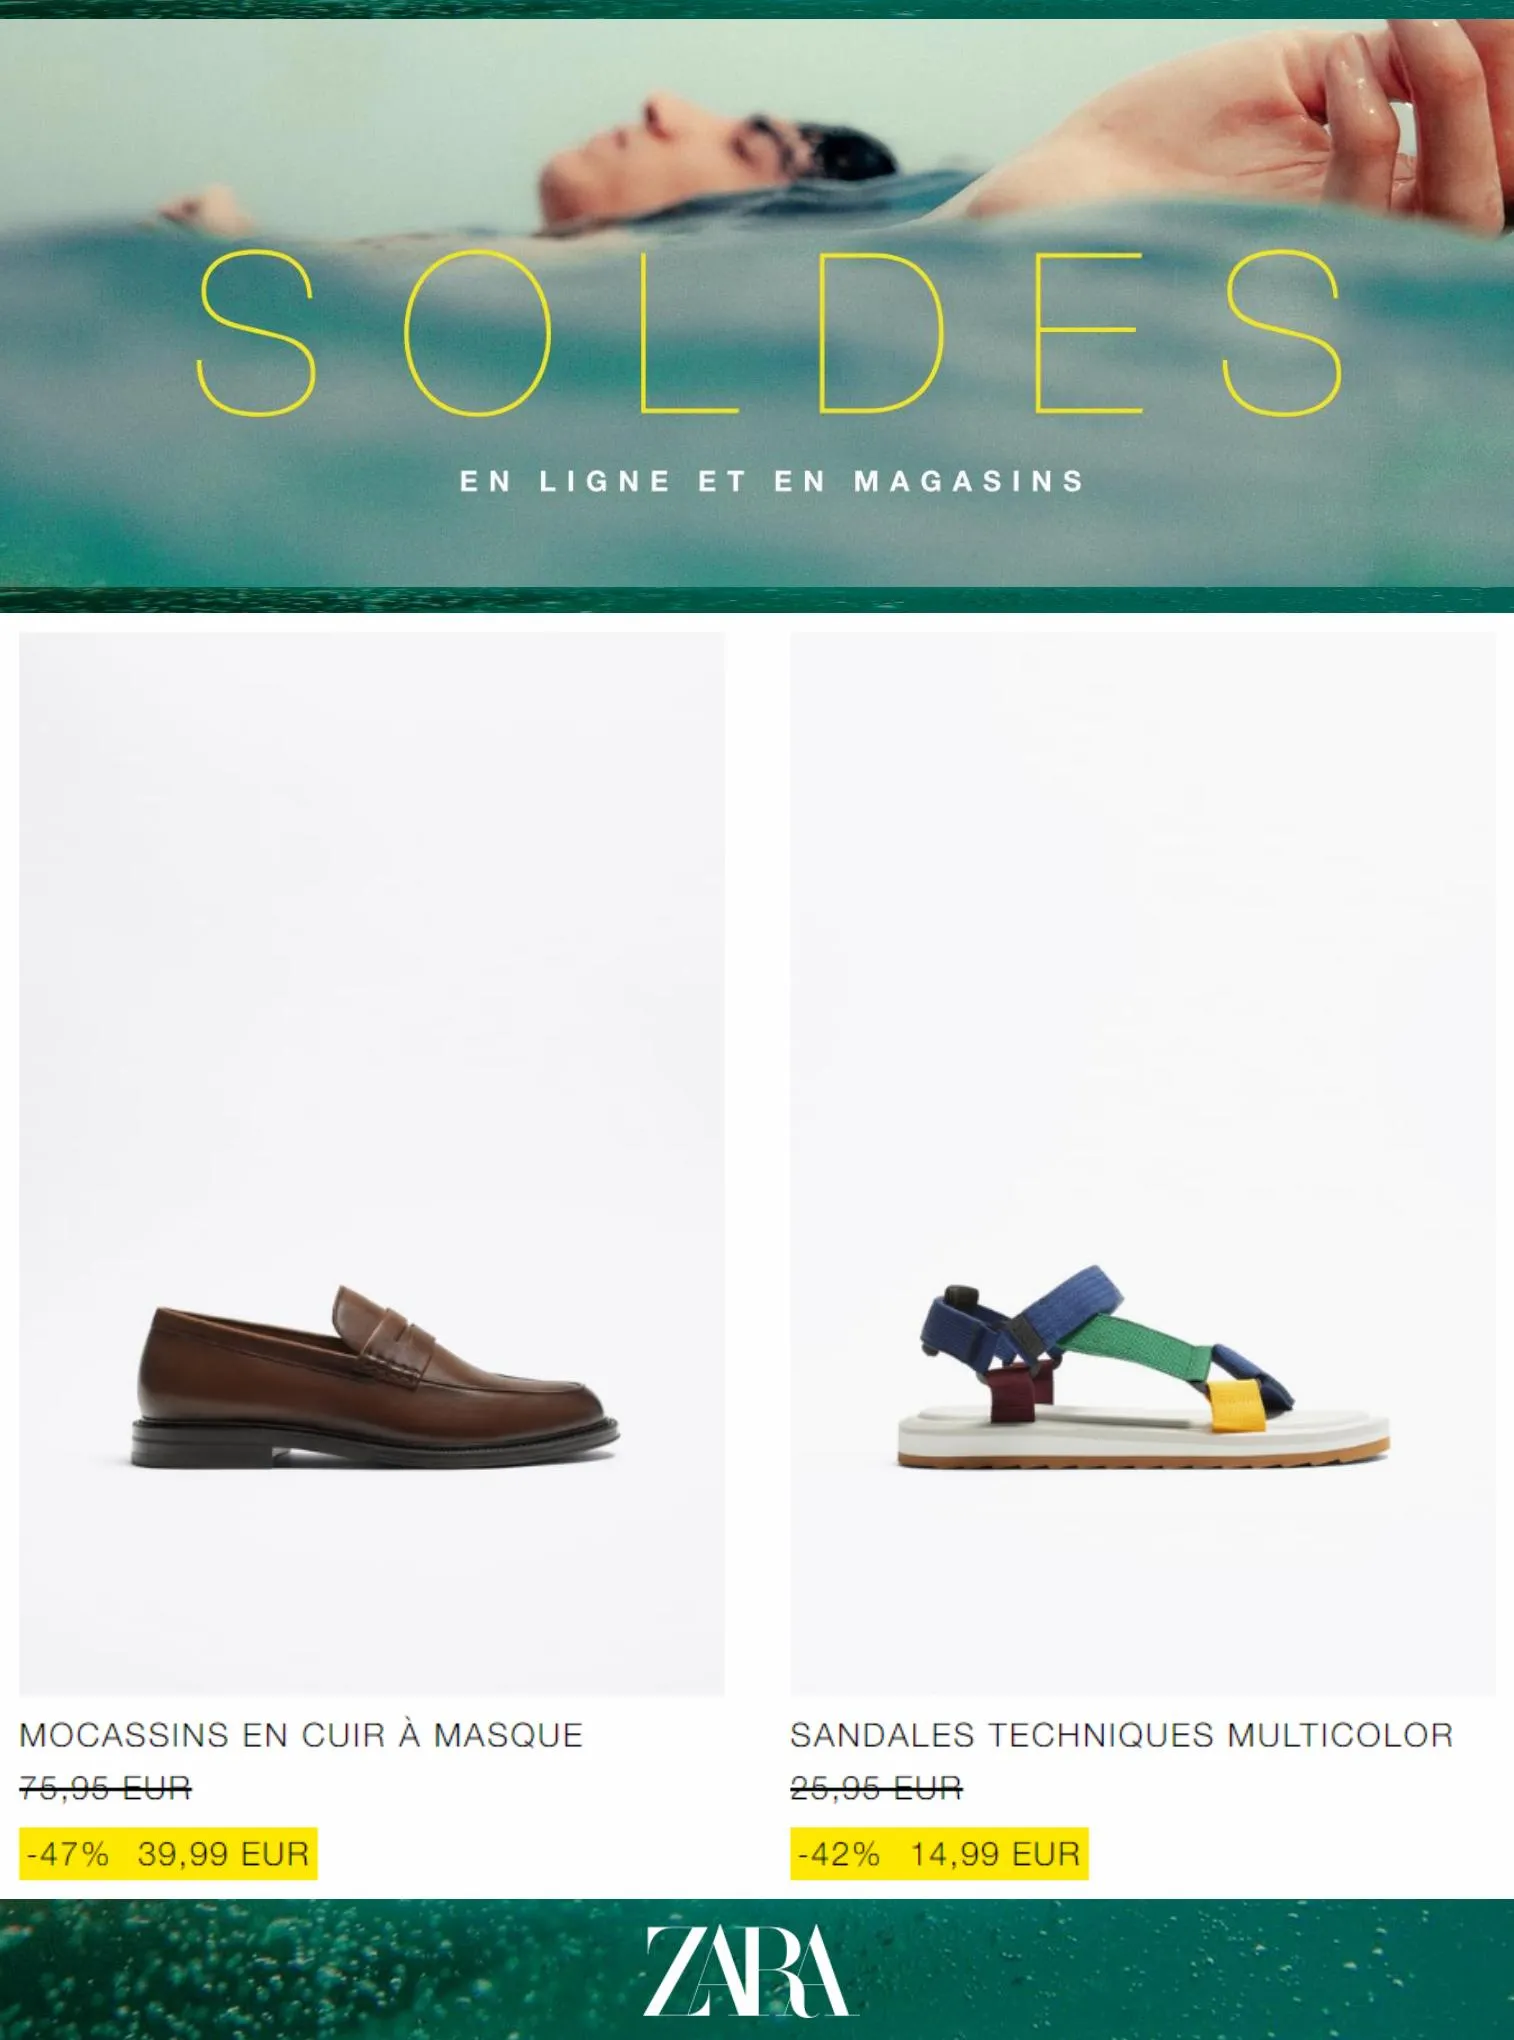 Catalogue Soldes | Homme, page 00004